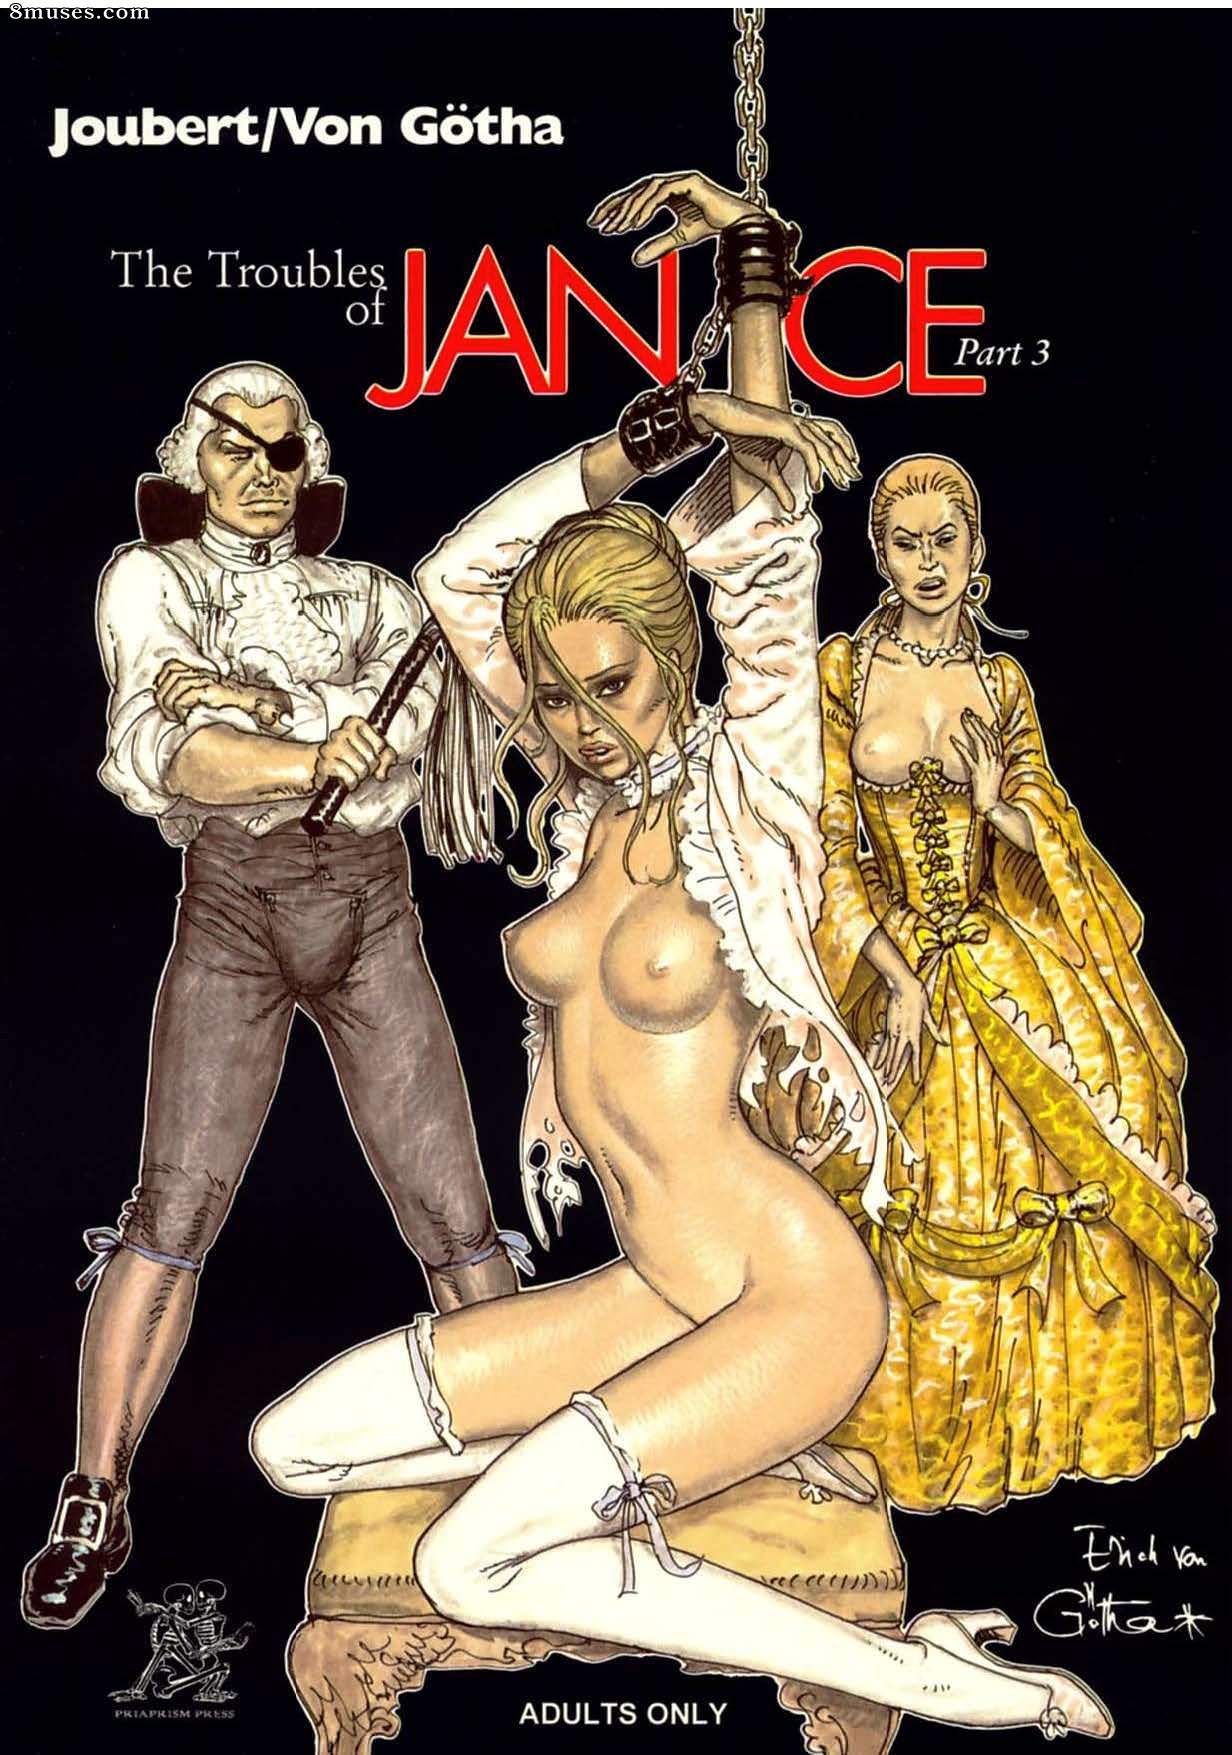 The troubles of janice porn comic 8muses